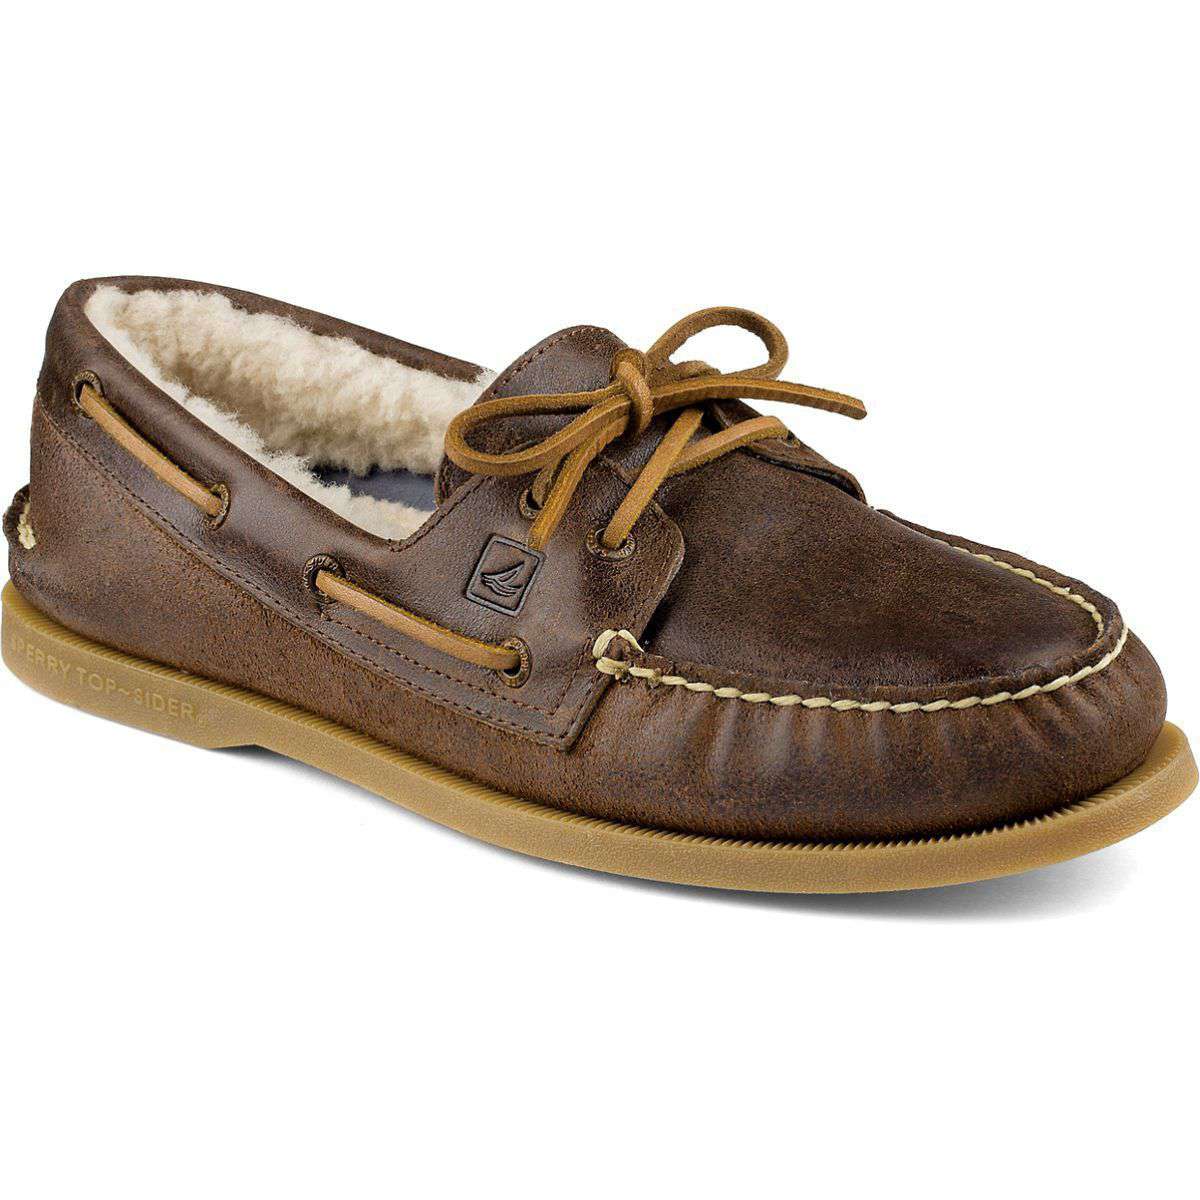 Men's Authentic Original Winter 2-Eye Boat Shoe in Brown by Sperry - Country Club Prep